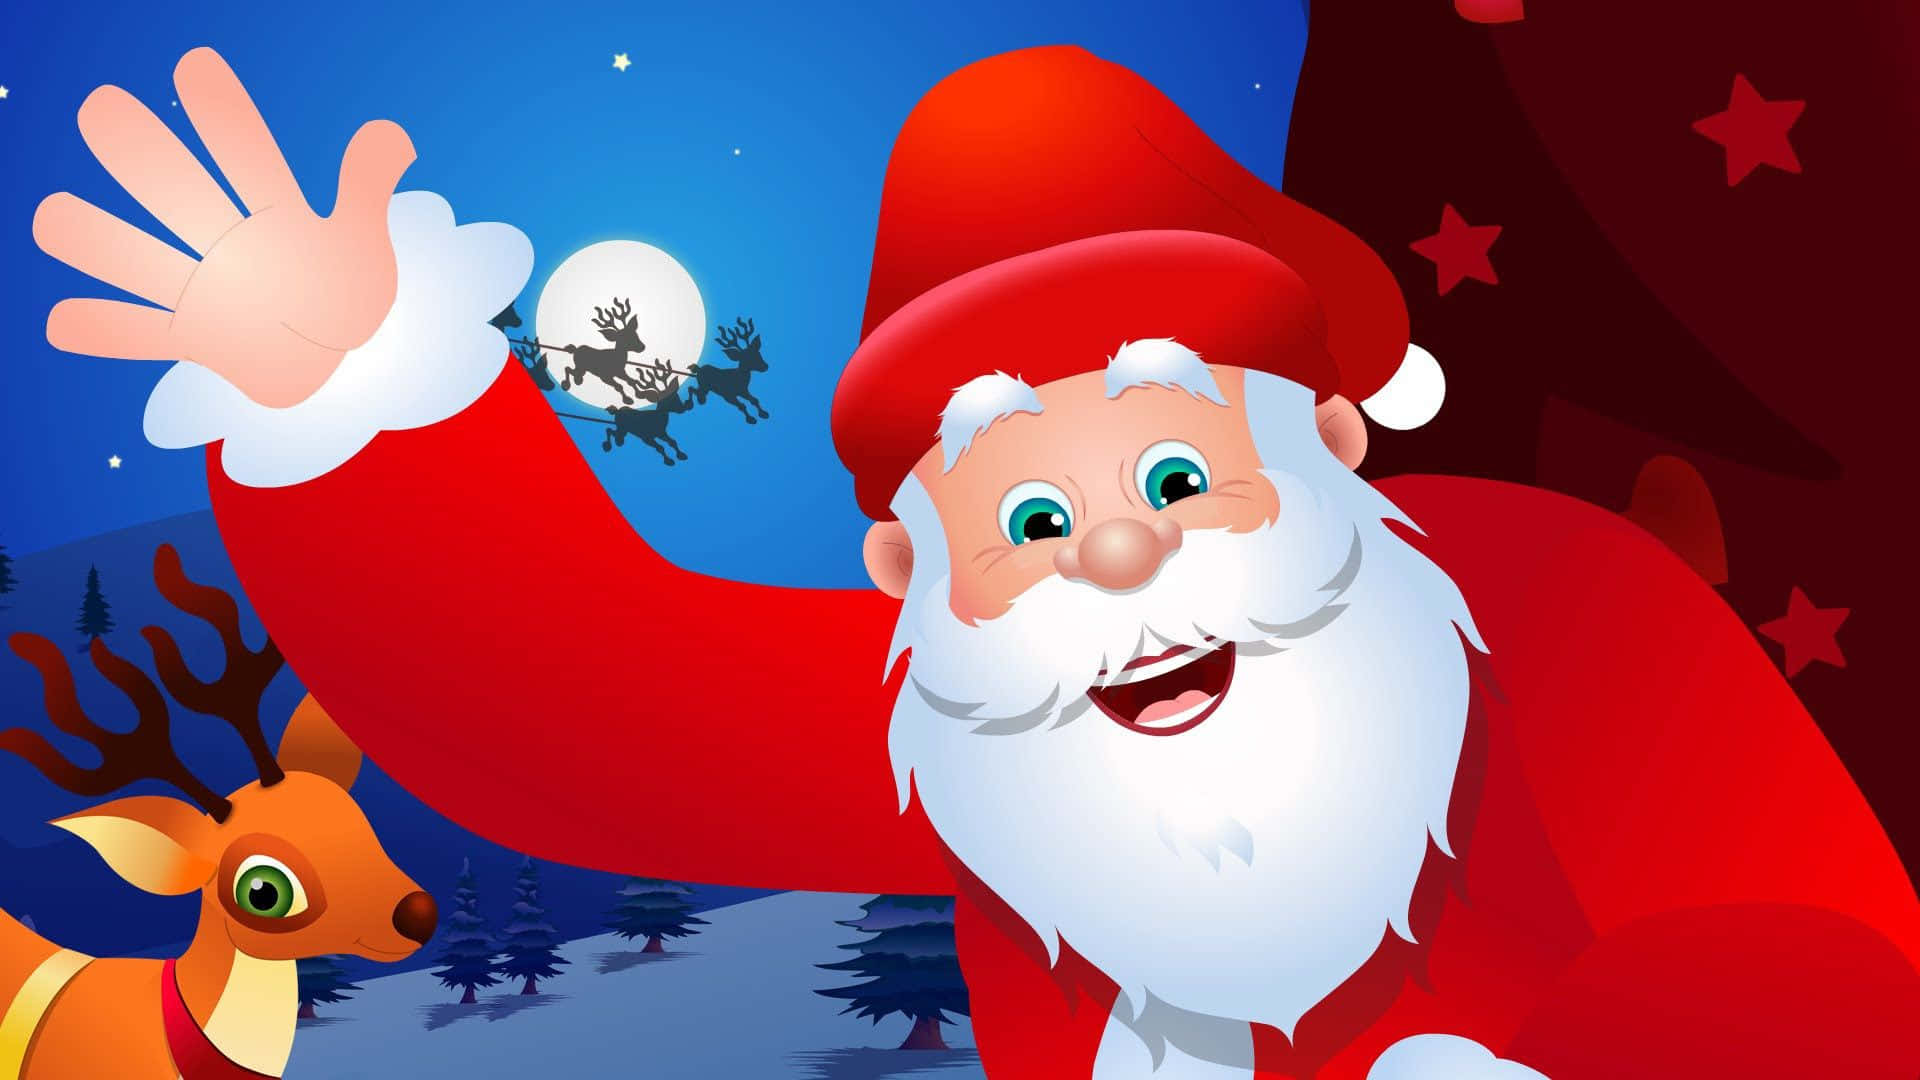 Welcome the Holidays with a Joyful Santa Claus Wallpaper